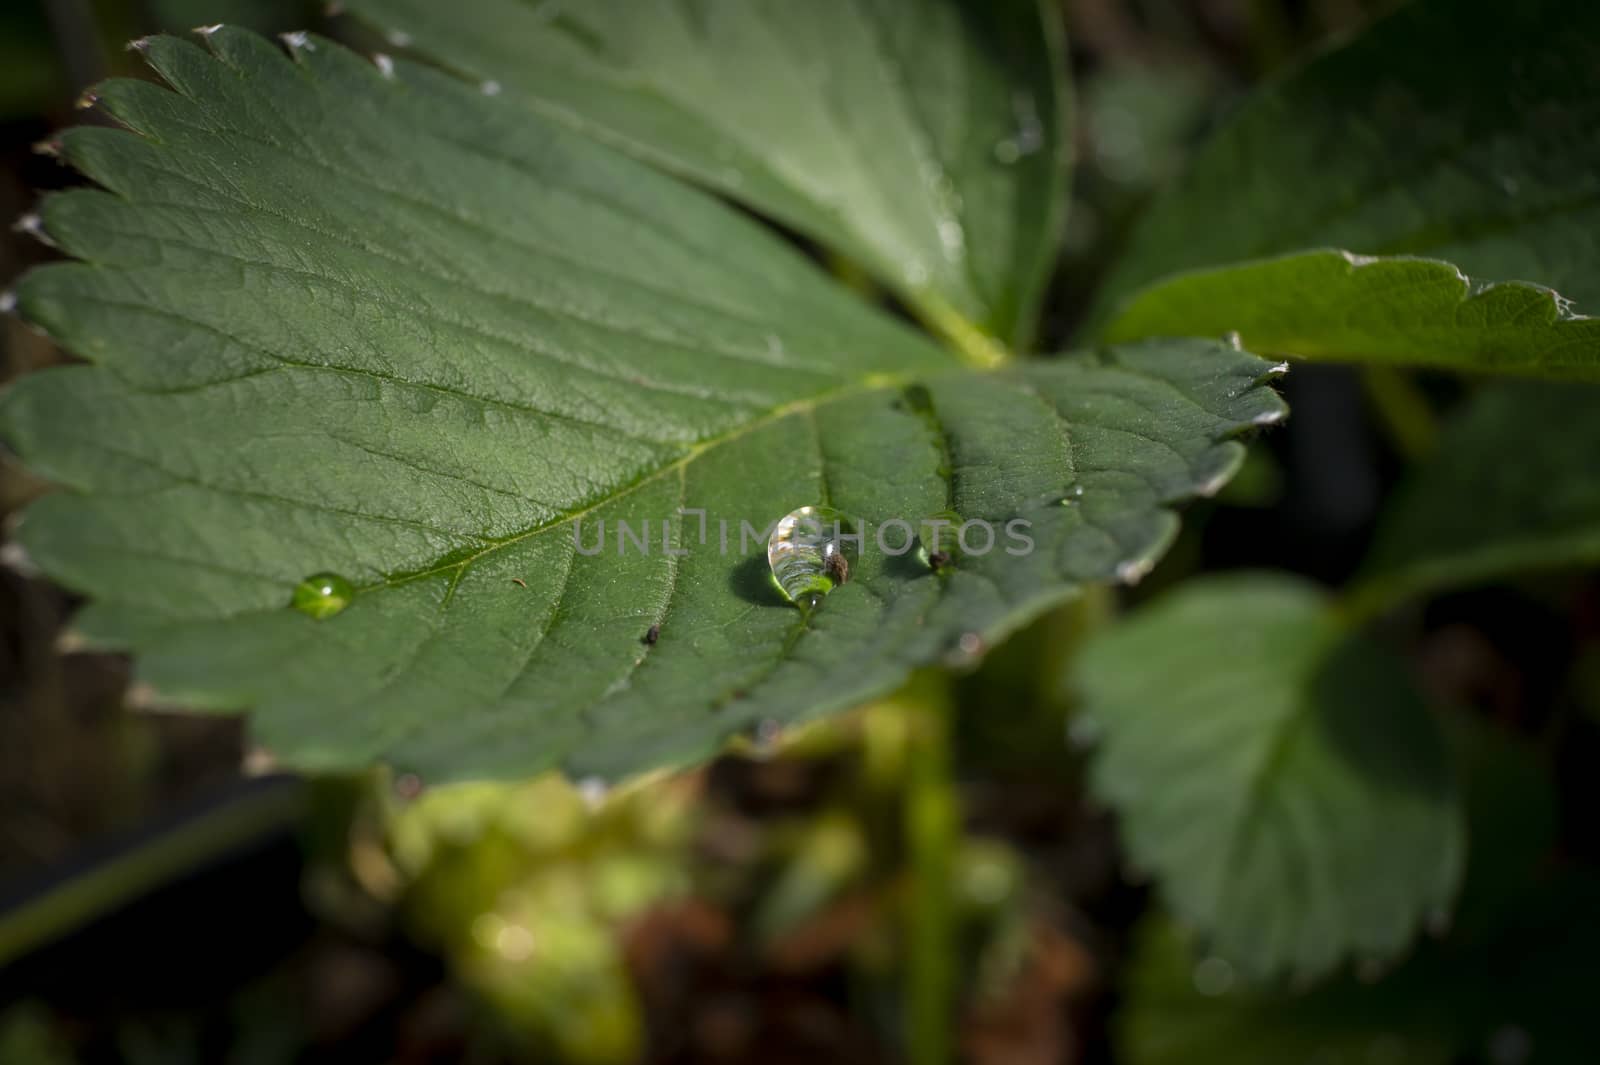 Droplets of water or rain on a green leaf by NetPix